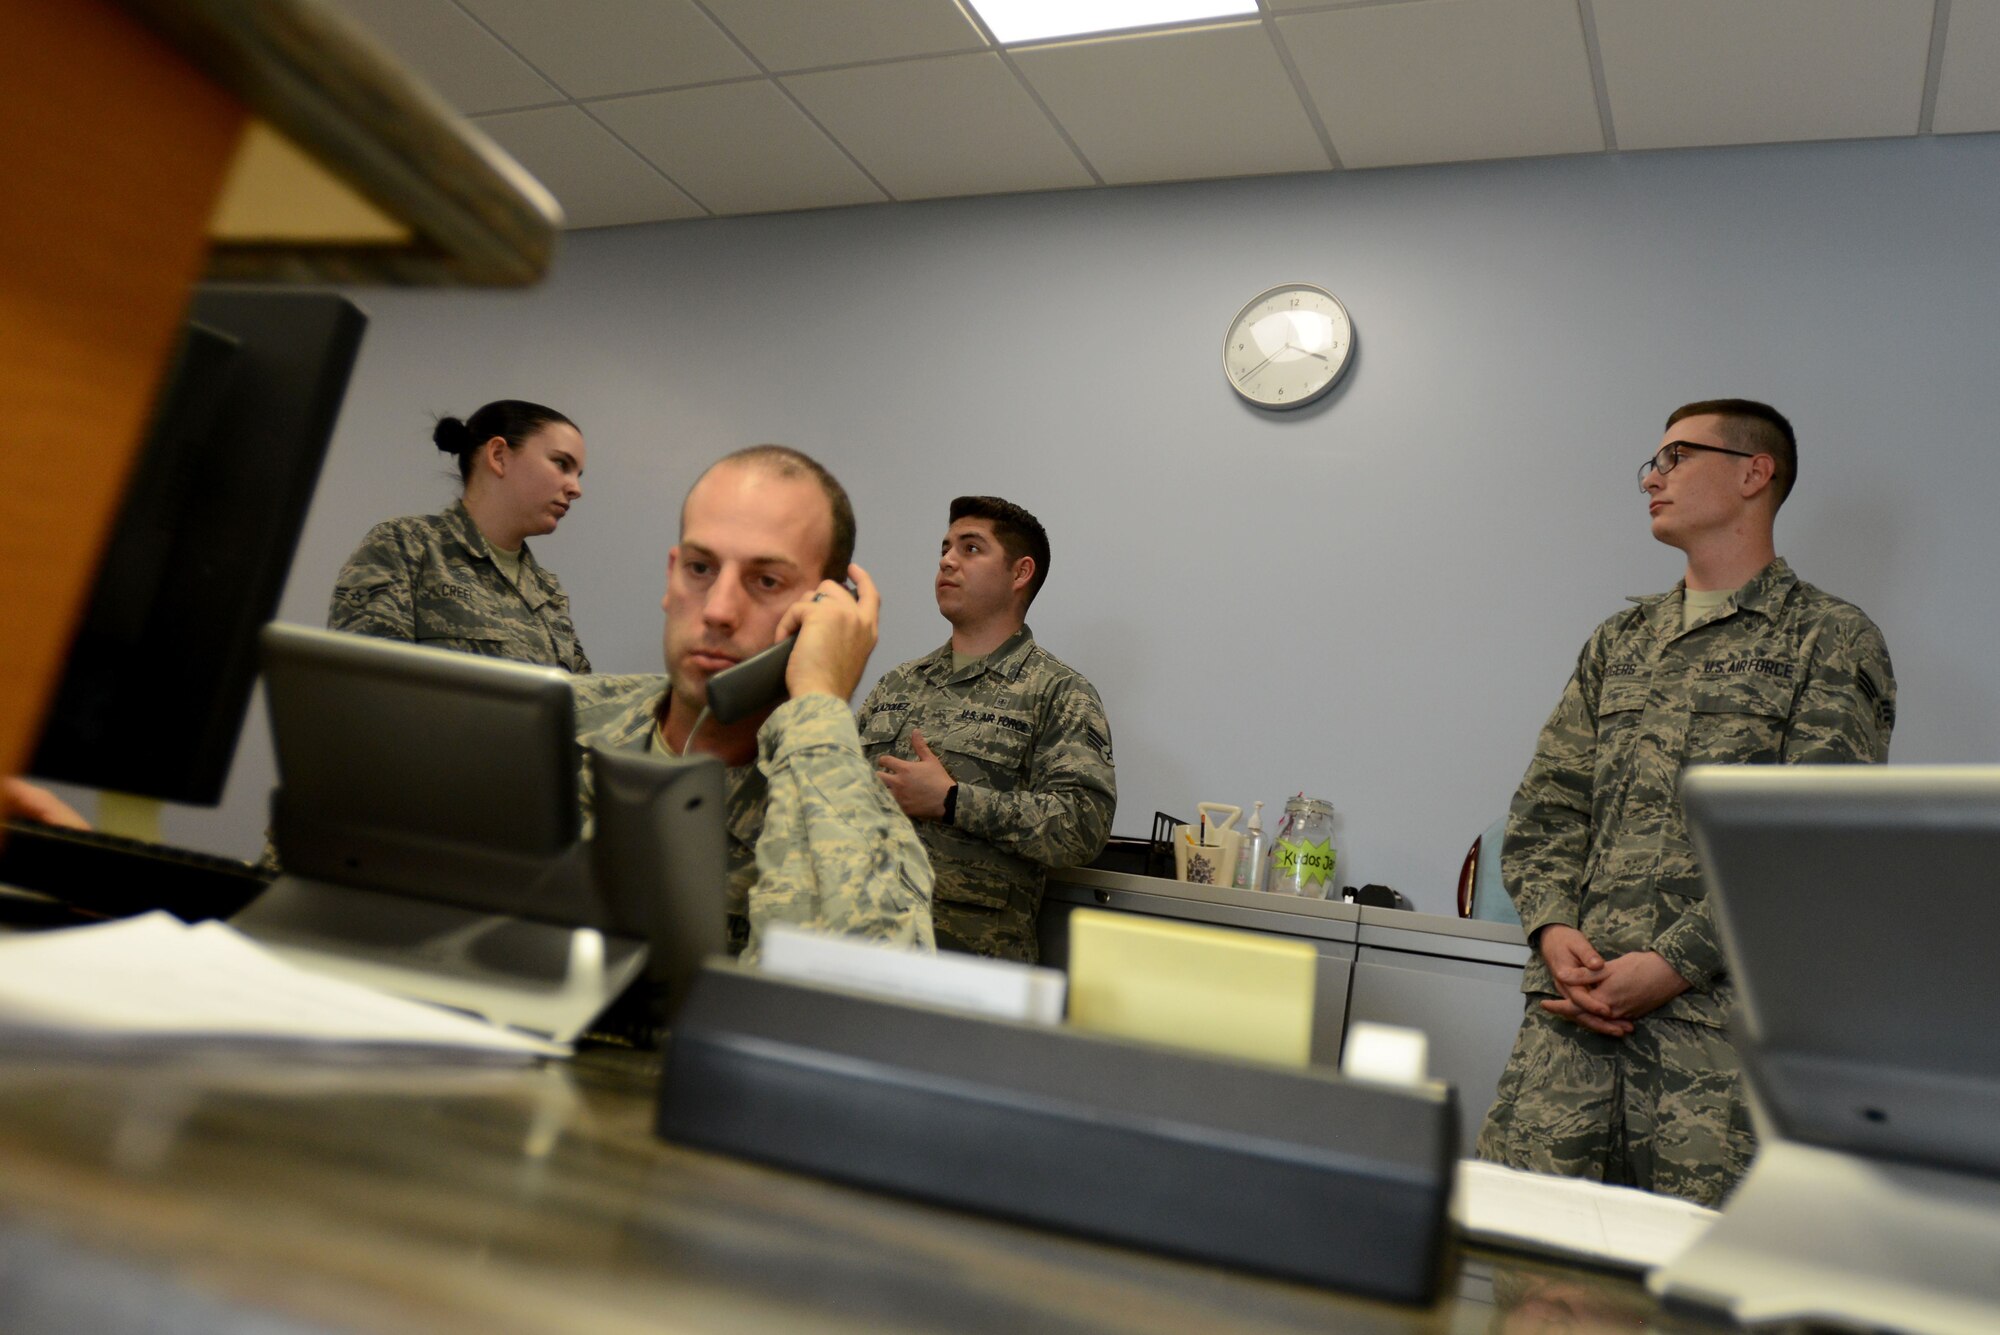 Airmen from the 20th Medical Group Mental Health Flight prepare for walk-in patients at Shaw Air Force Base, S.C., Dec. 4, 2017.